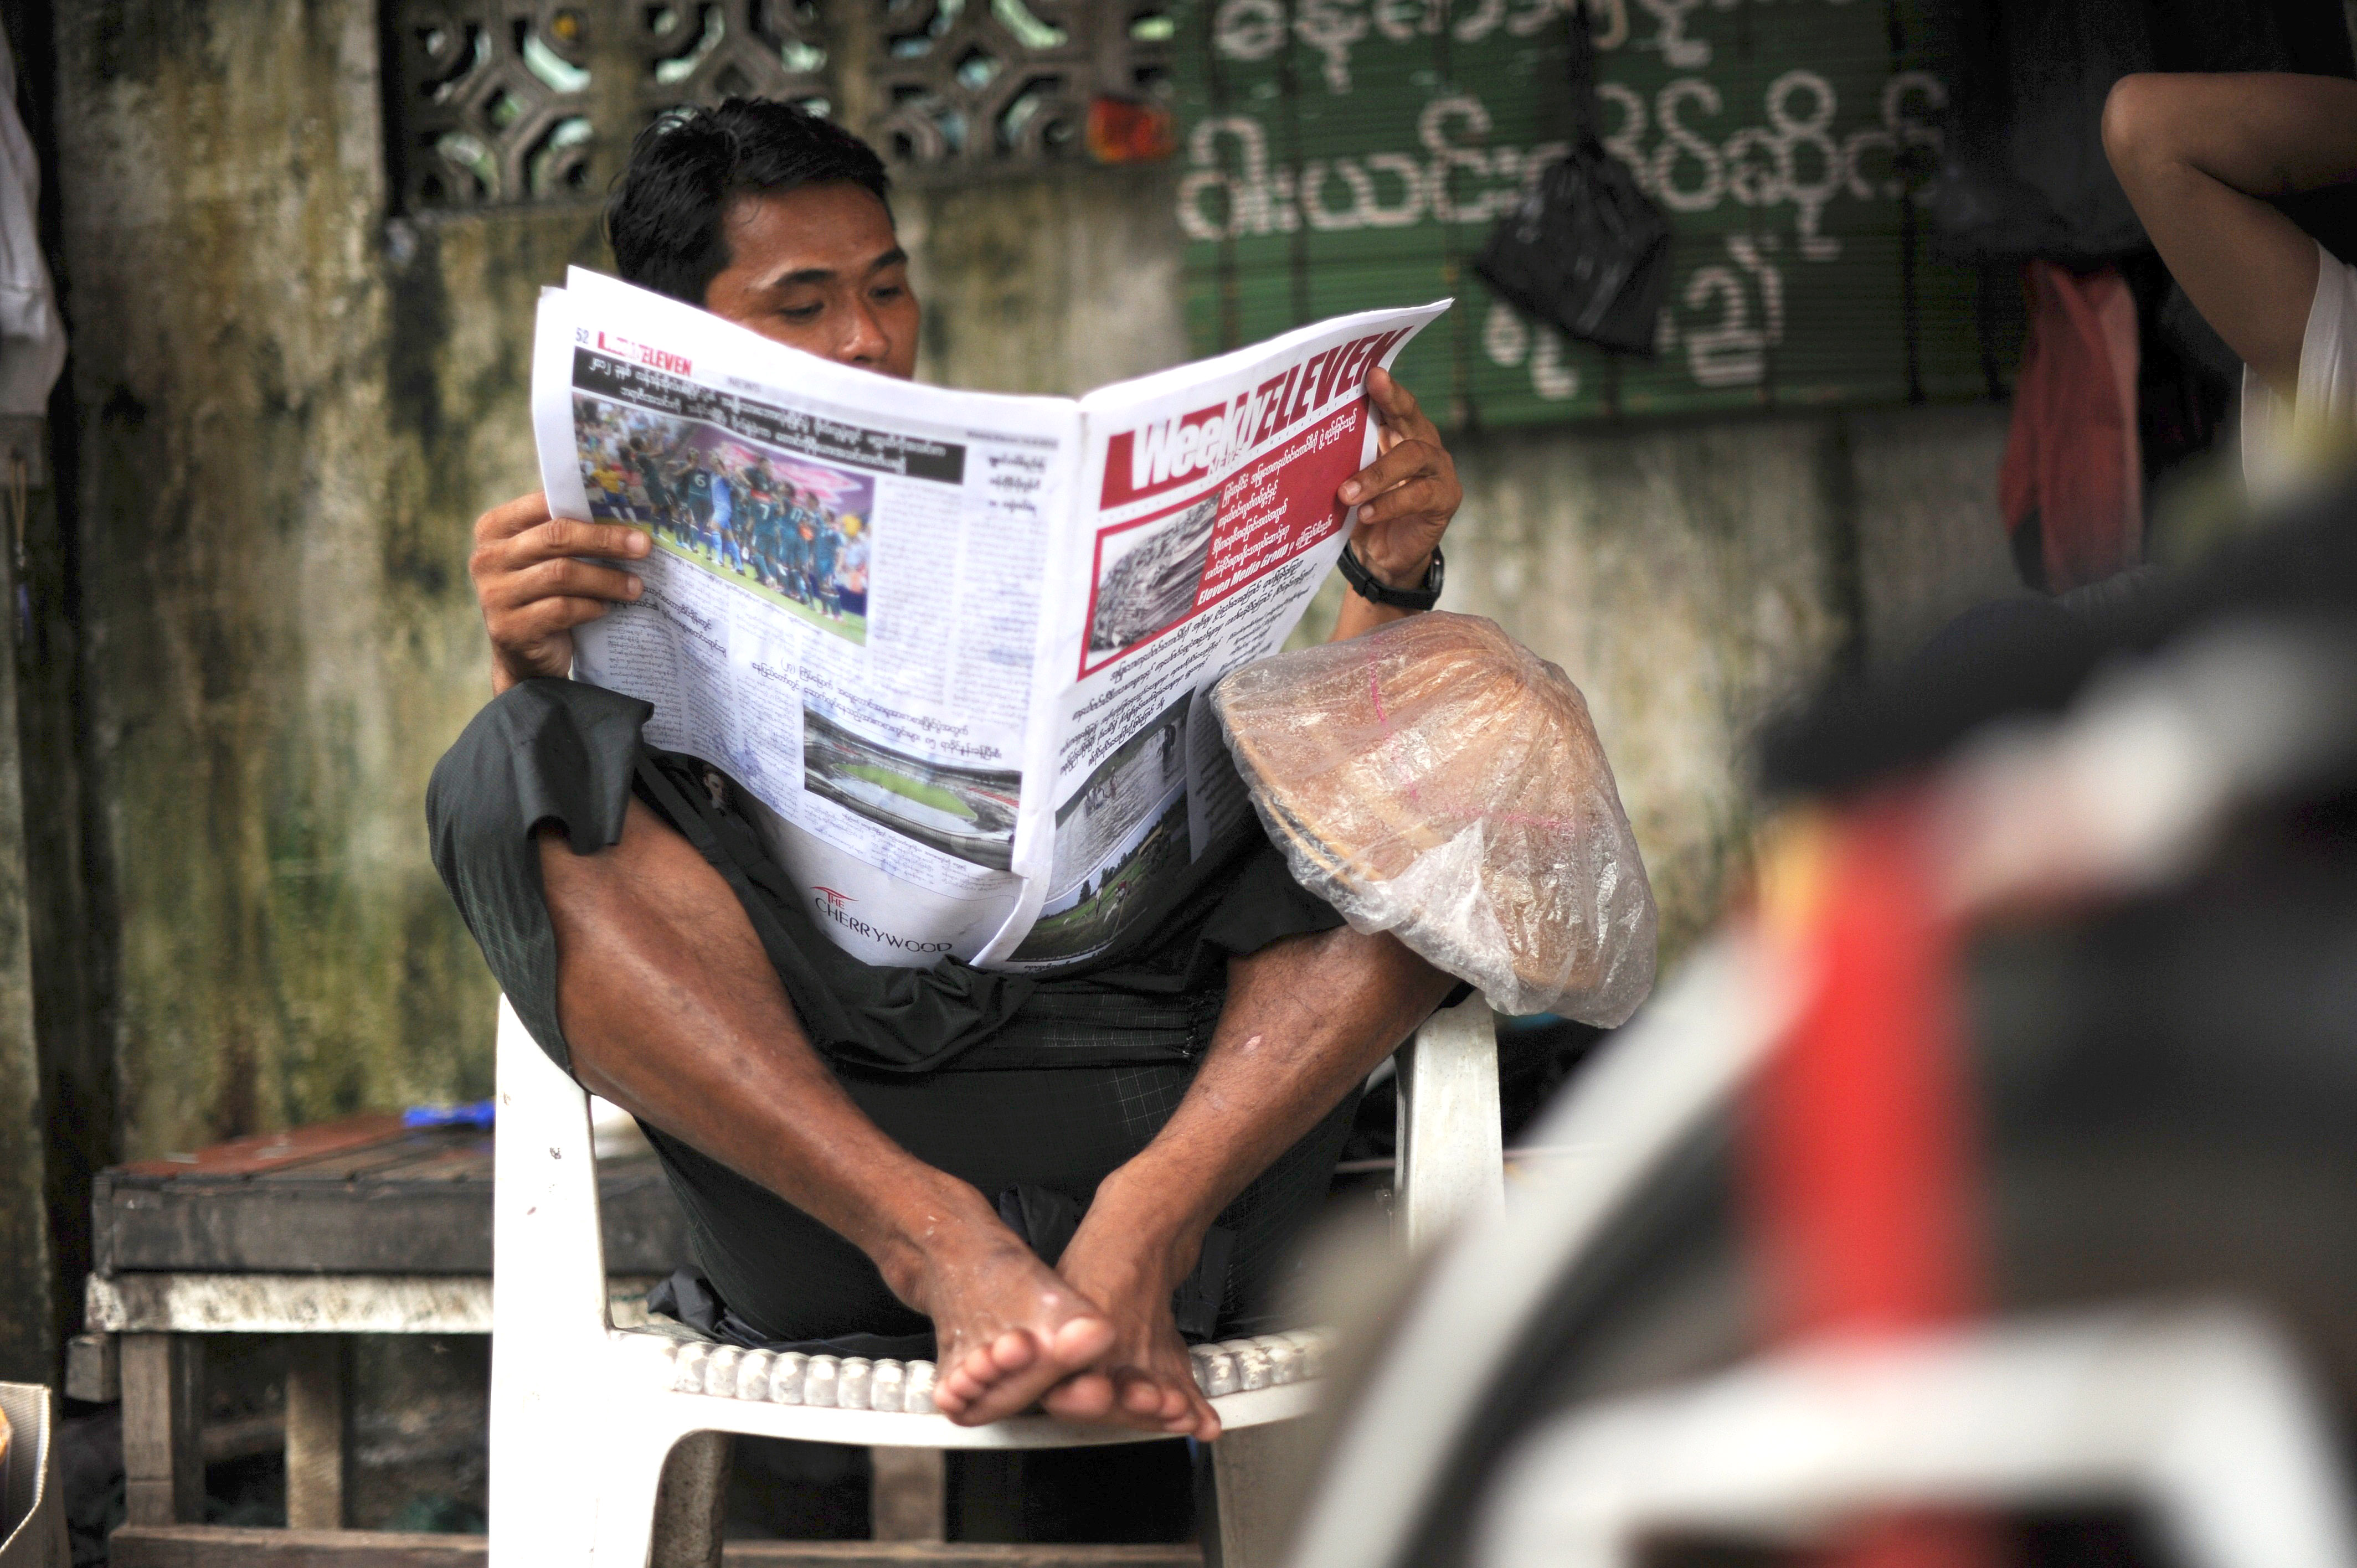 A man sitting in a chair reads a newspaper in Myanmar